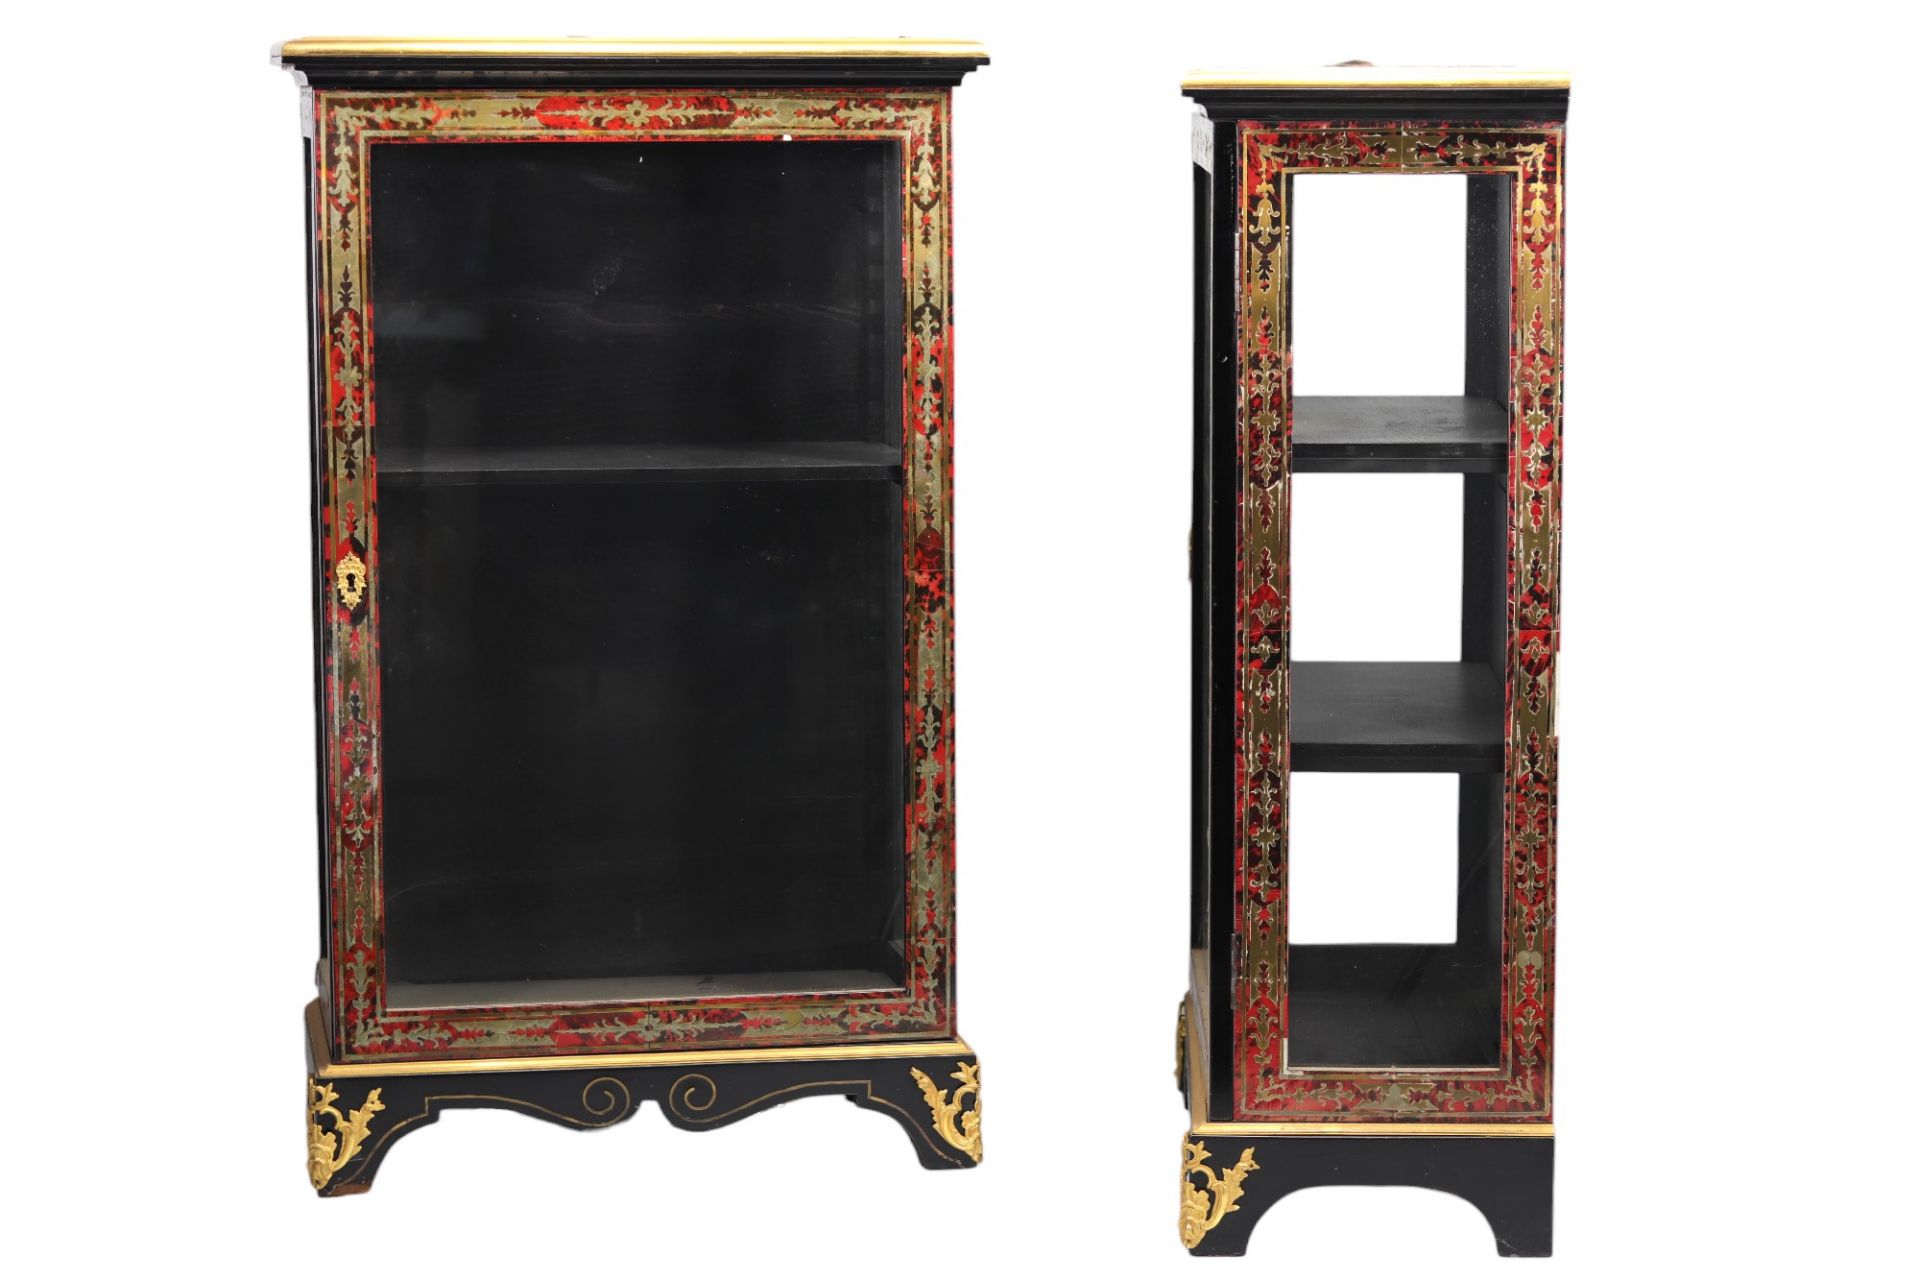 Pair of Boulle marquetry display cabinets in tortoise shell and brass from Napoleon III period - Image 2 of 2